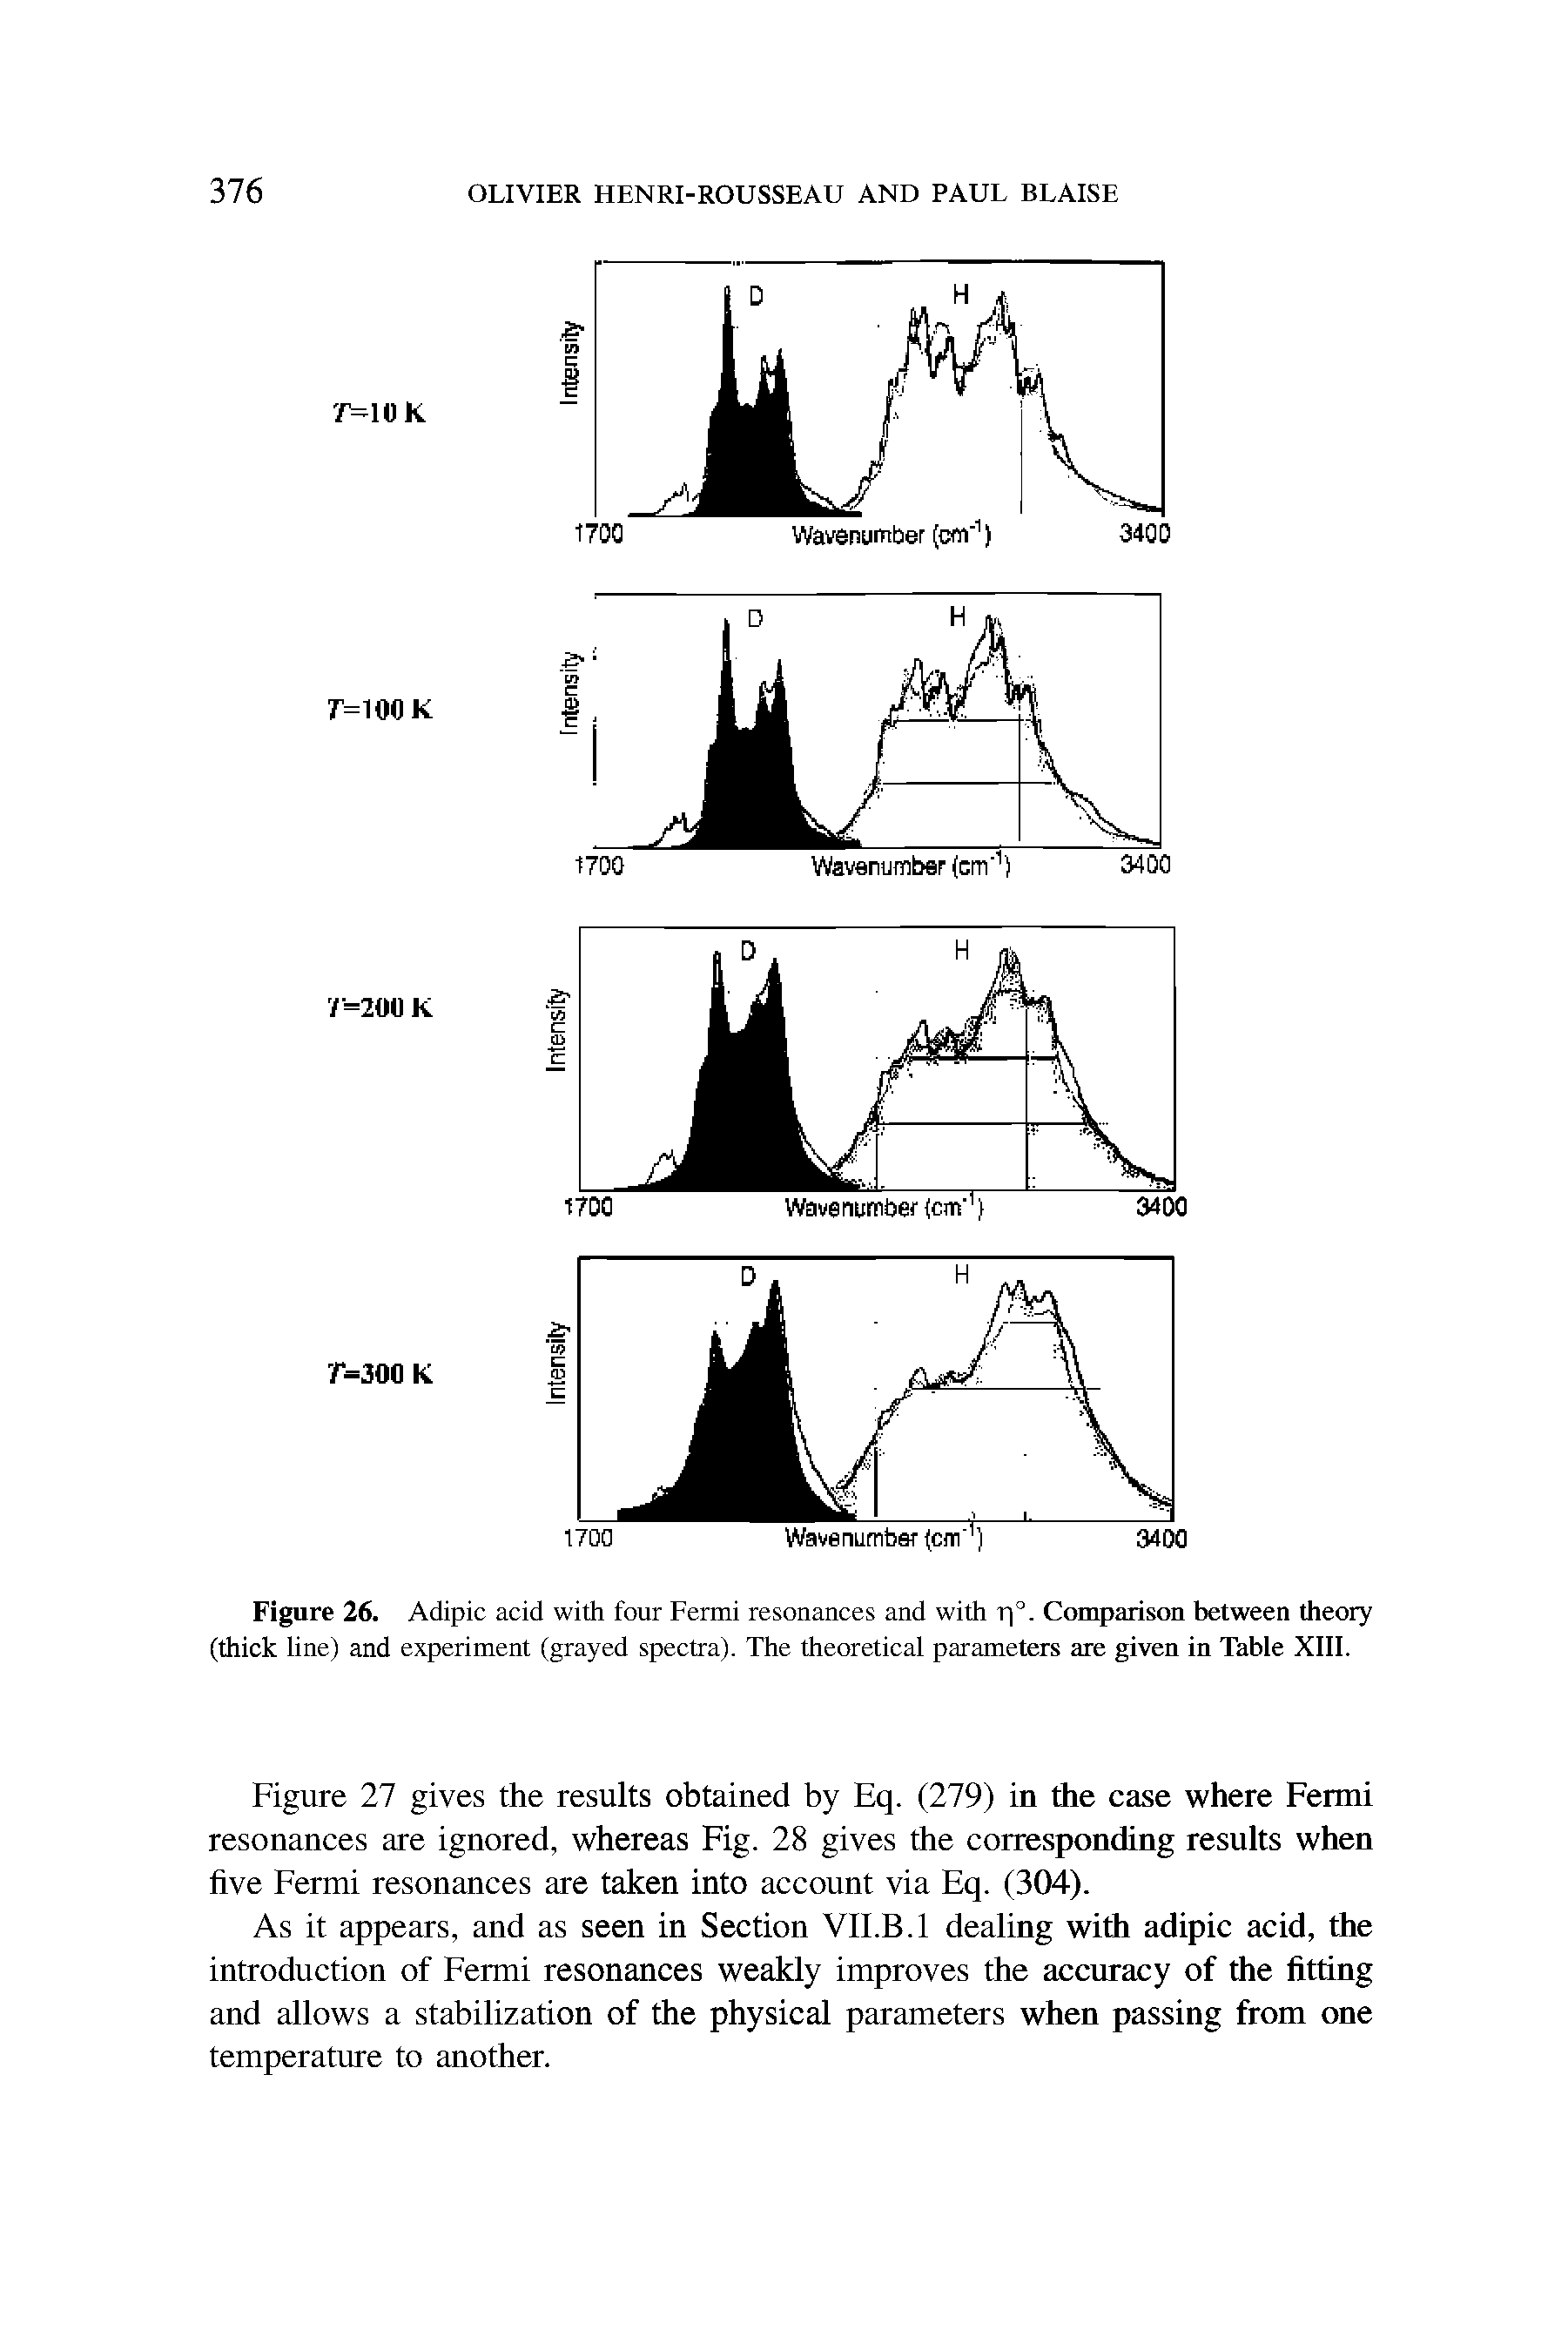 Figure 26. Adipic acid with four Fermi resonances and with r °. Comparison between theory (thick line) and experiment (grayed spectra). The theoretical parameters are given in Table XIII.